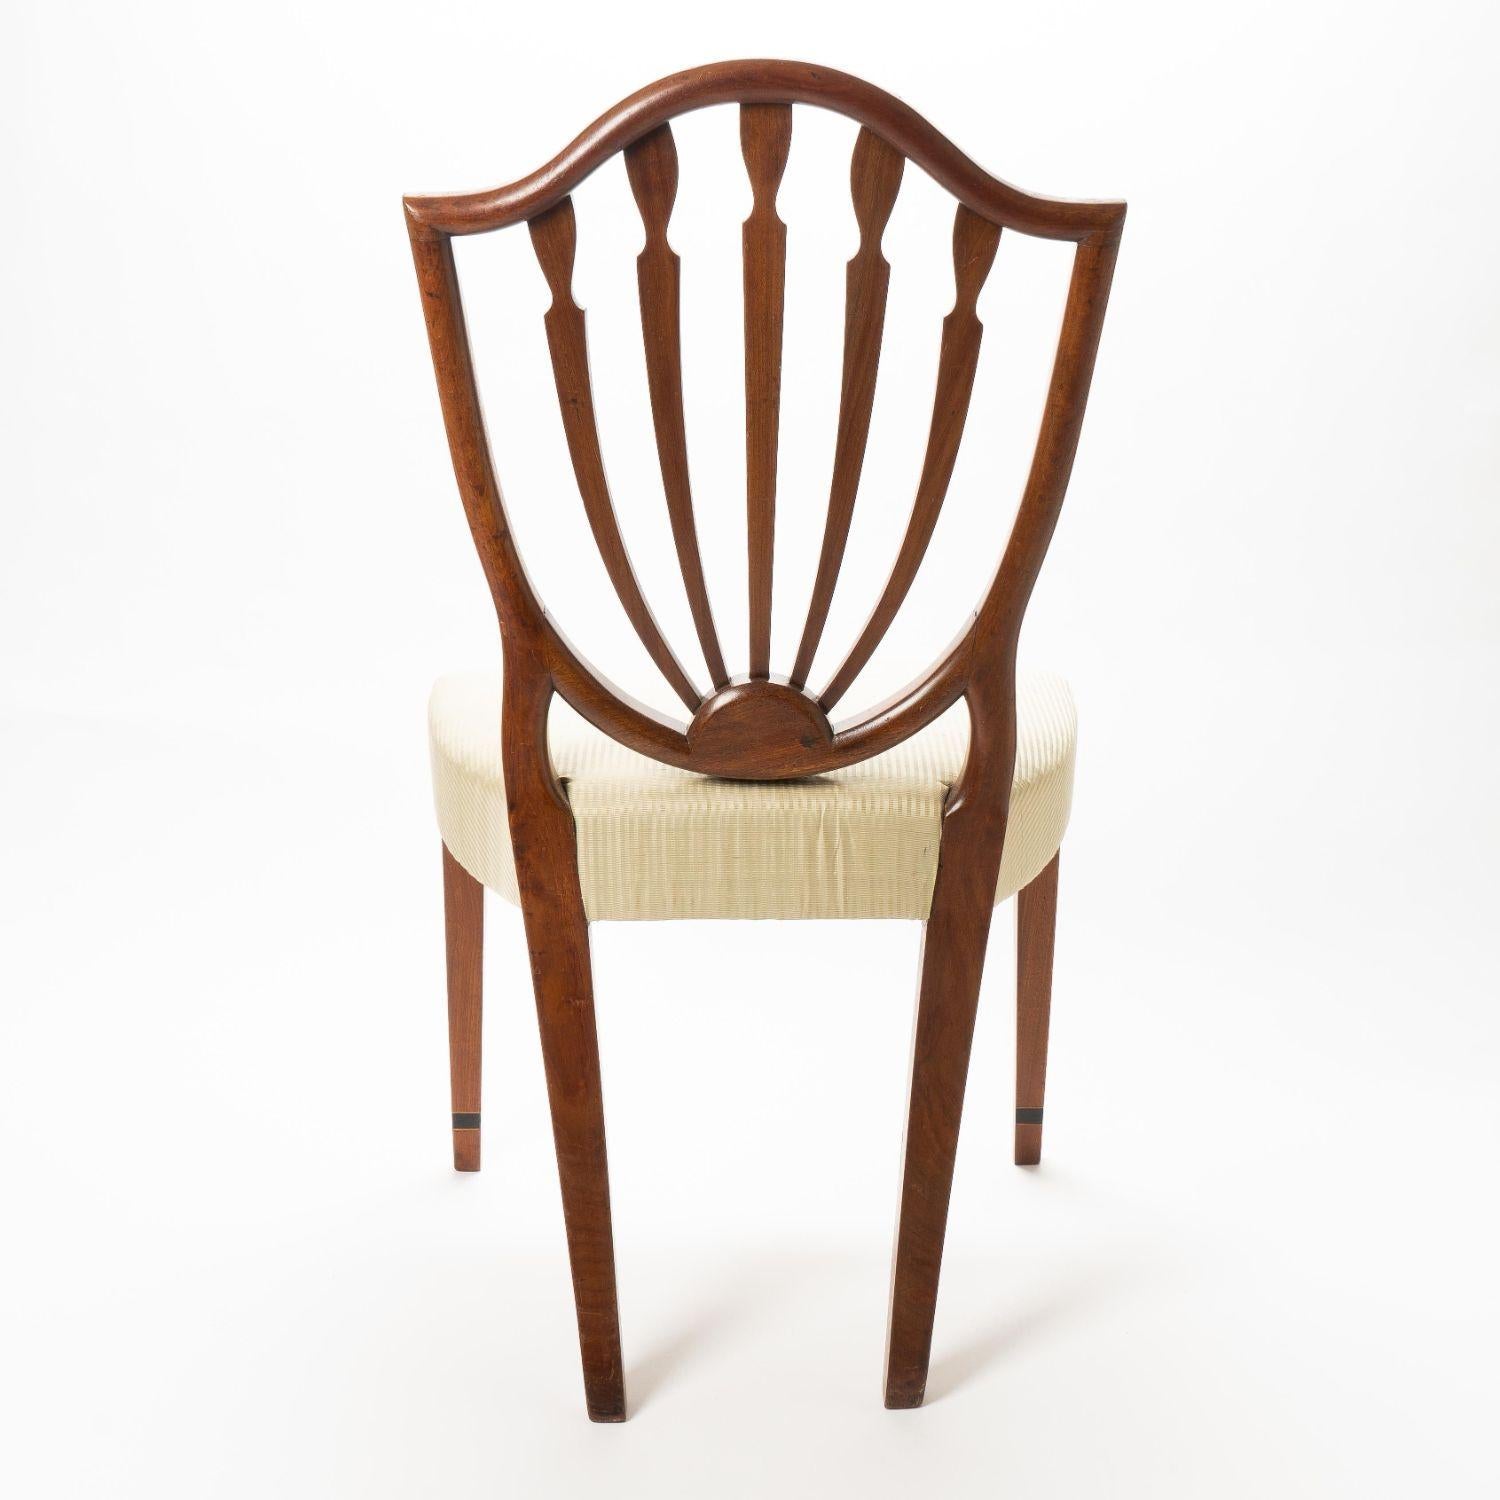 Late 18th Century American Mahogany Shield Back Side Chair with Serpentine Seat, c. 1790 For Sale